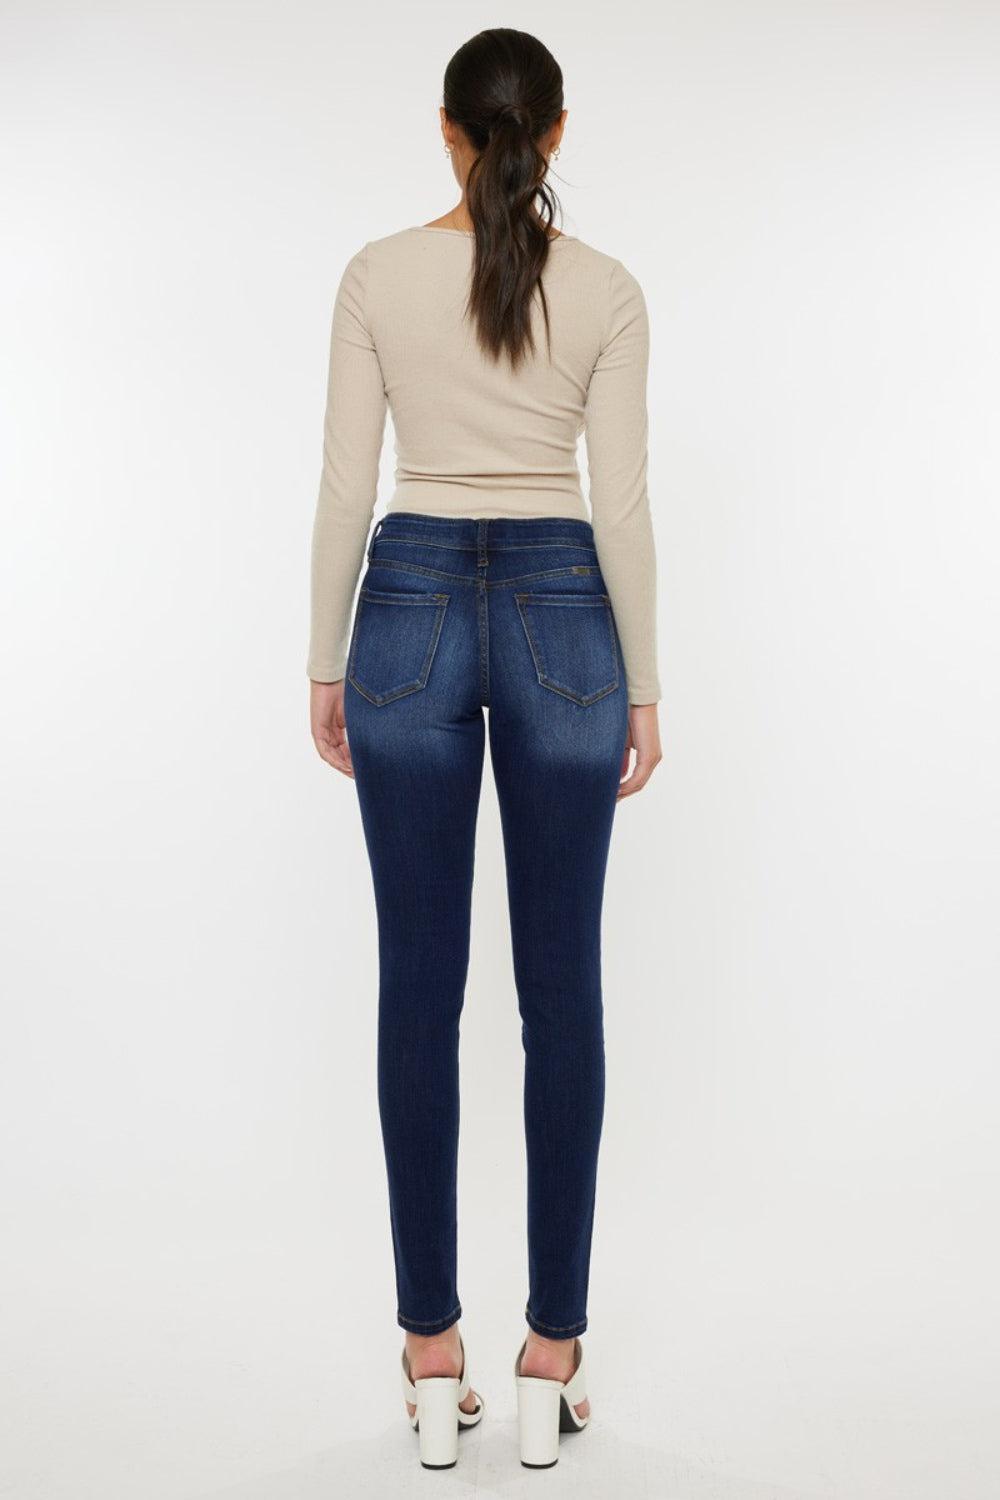 a woman in a beige top and jeans